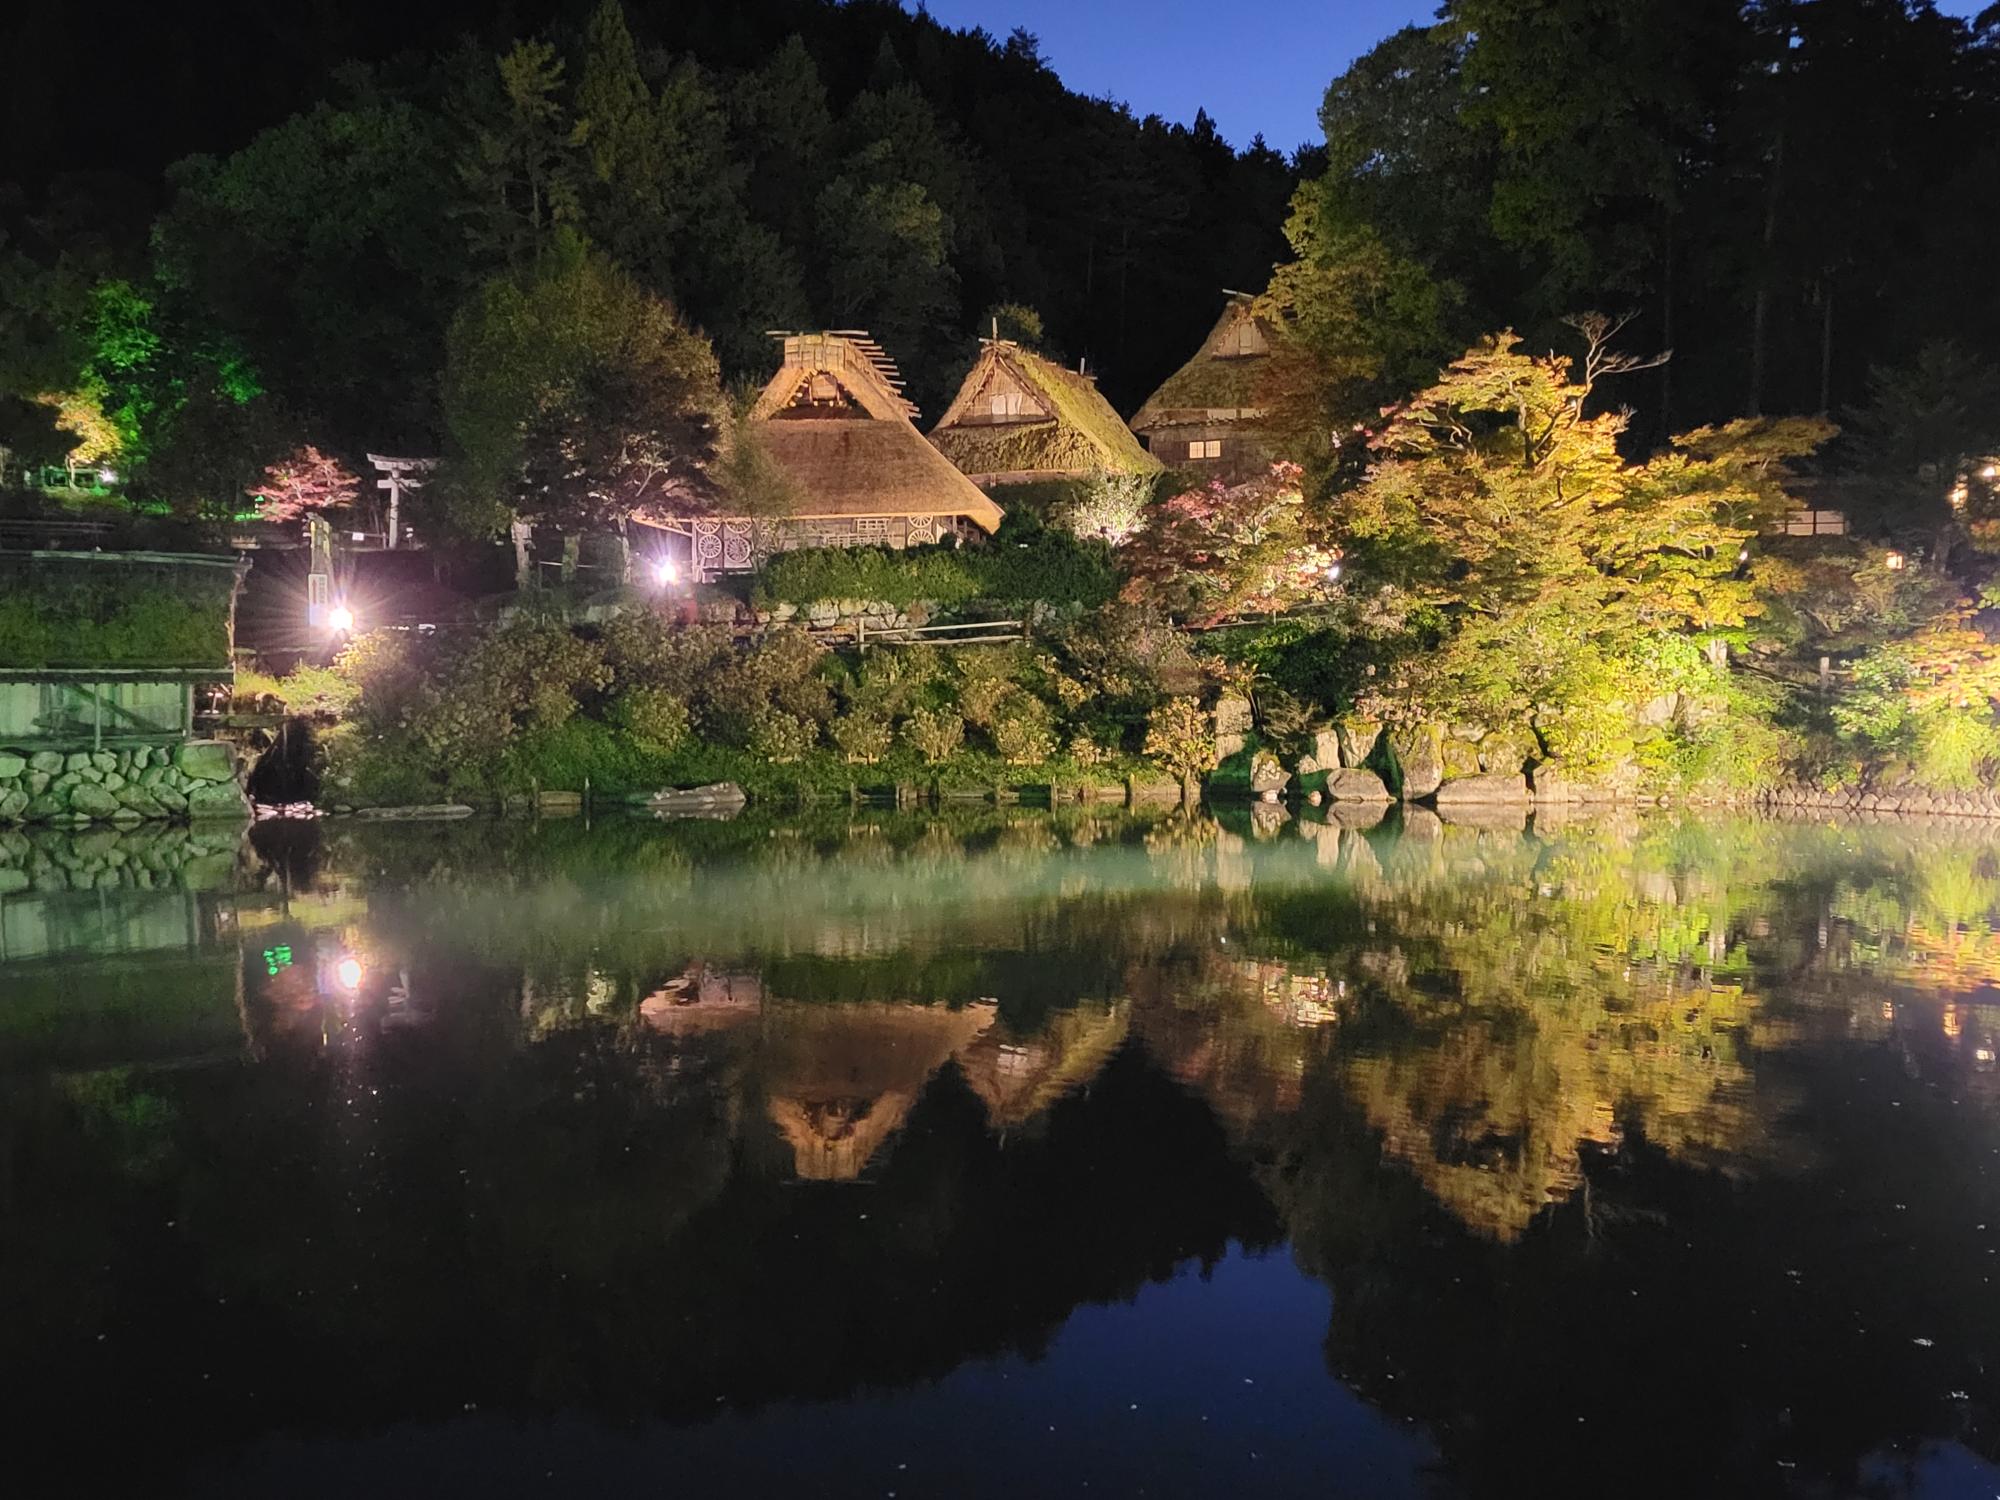 Special Event in Hida Folk Village
Dishes from the long-established Takayama ryotei restaurant “Susaki” will be served.